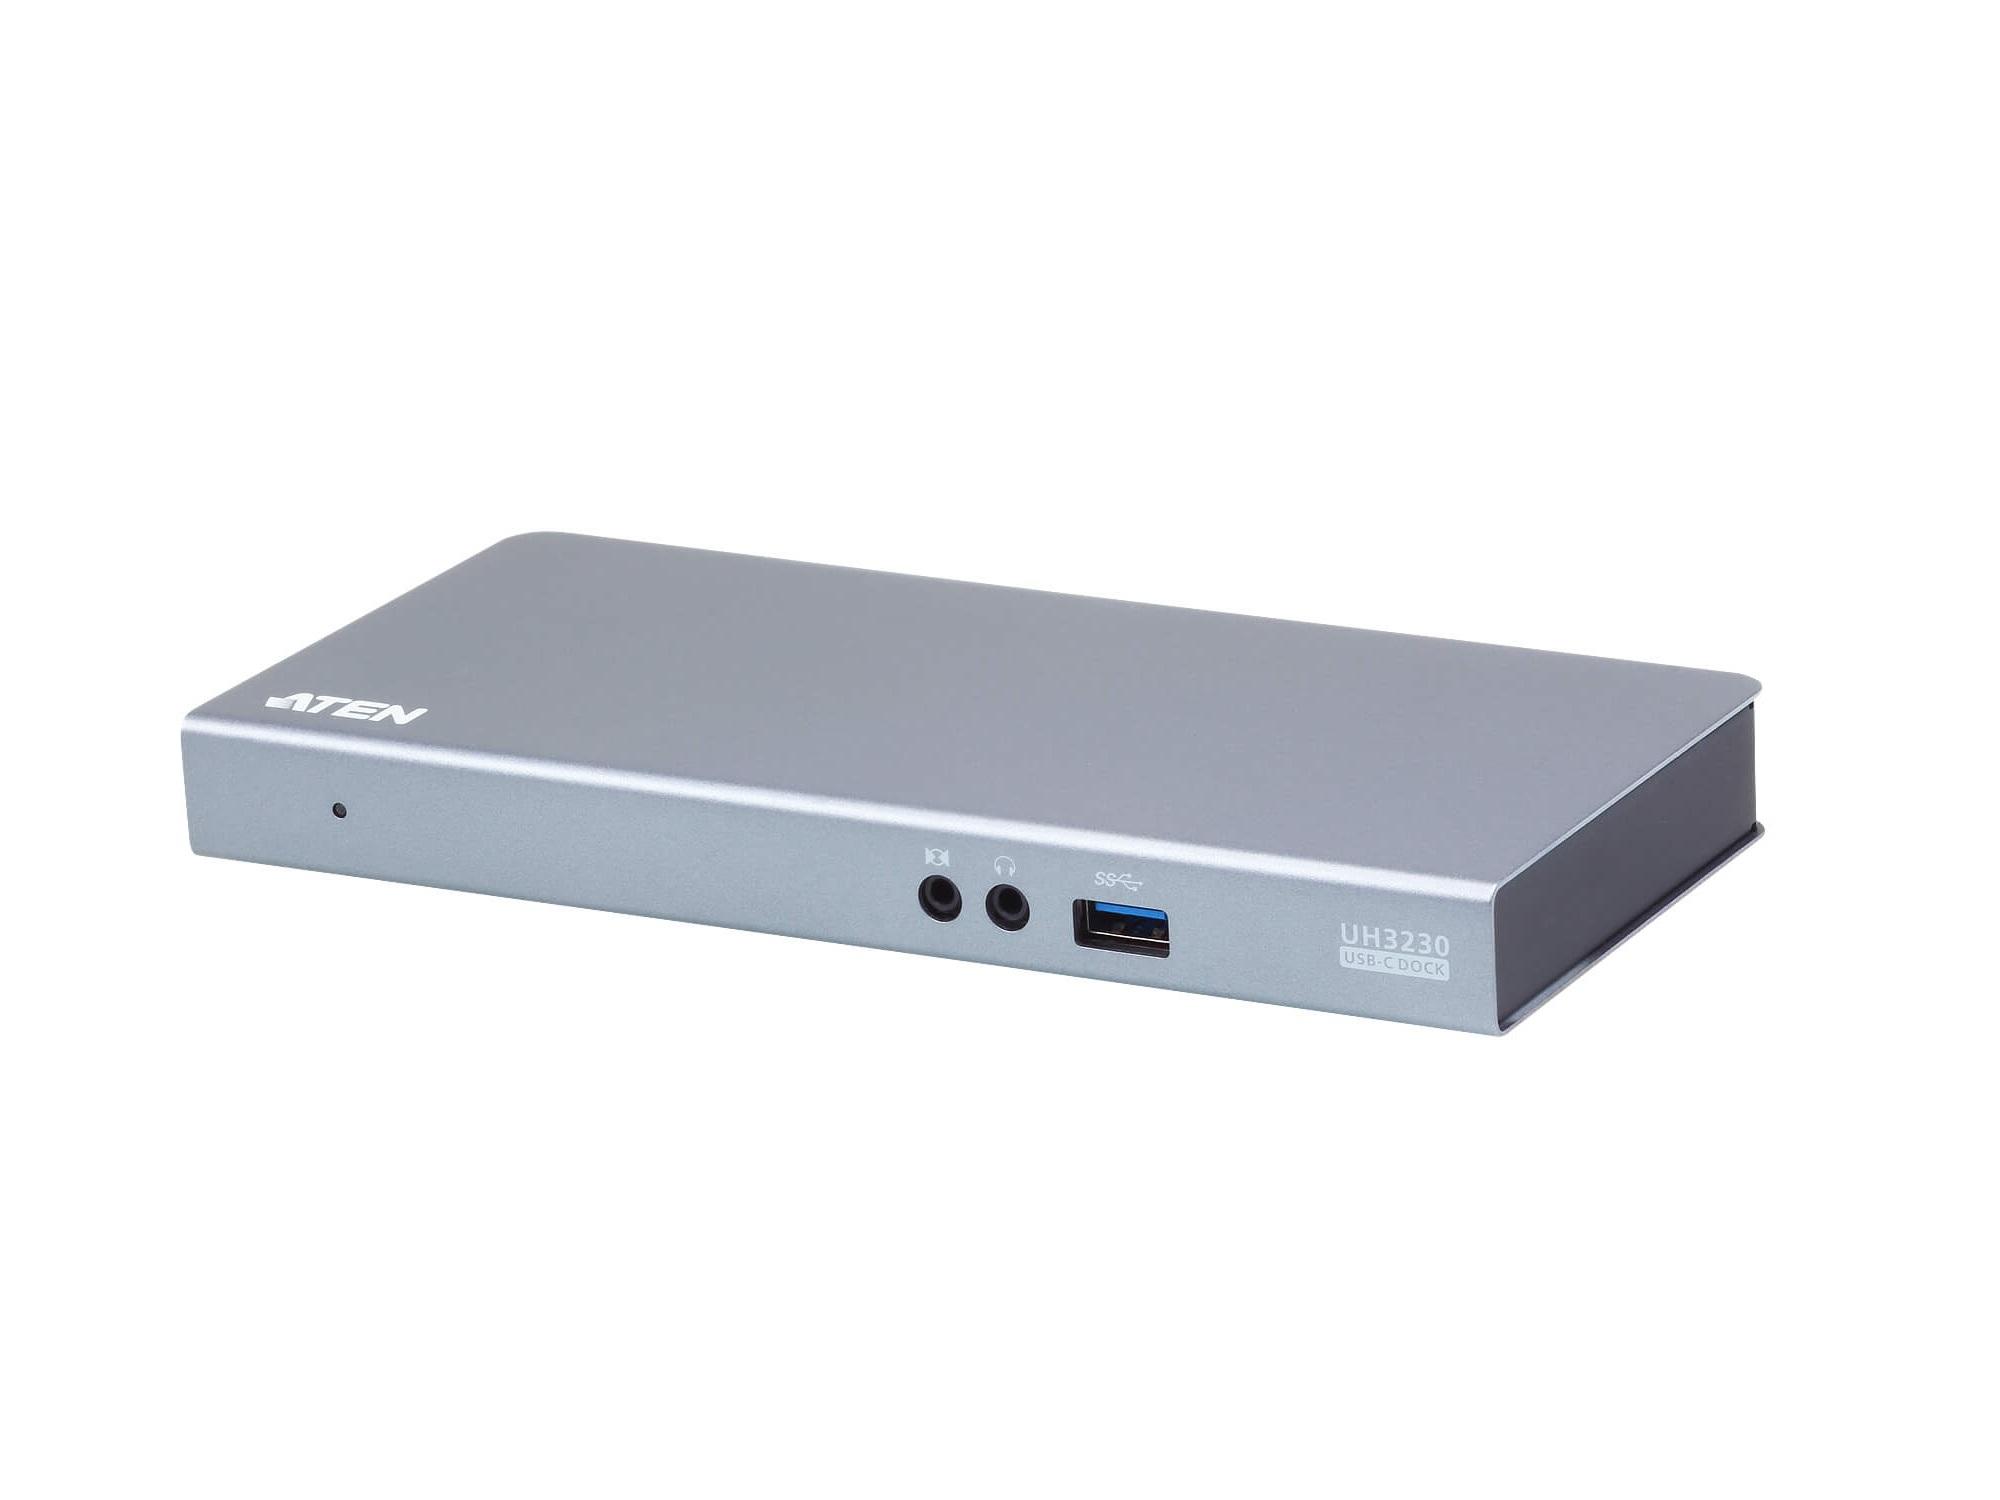 UH3230 USB-C Multiport Dock with Power Charging by Aten